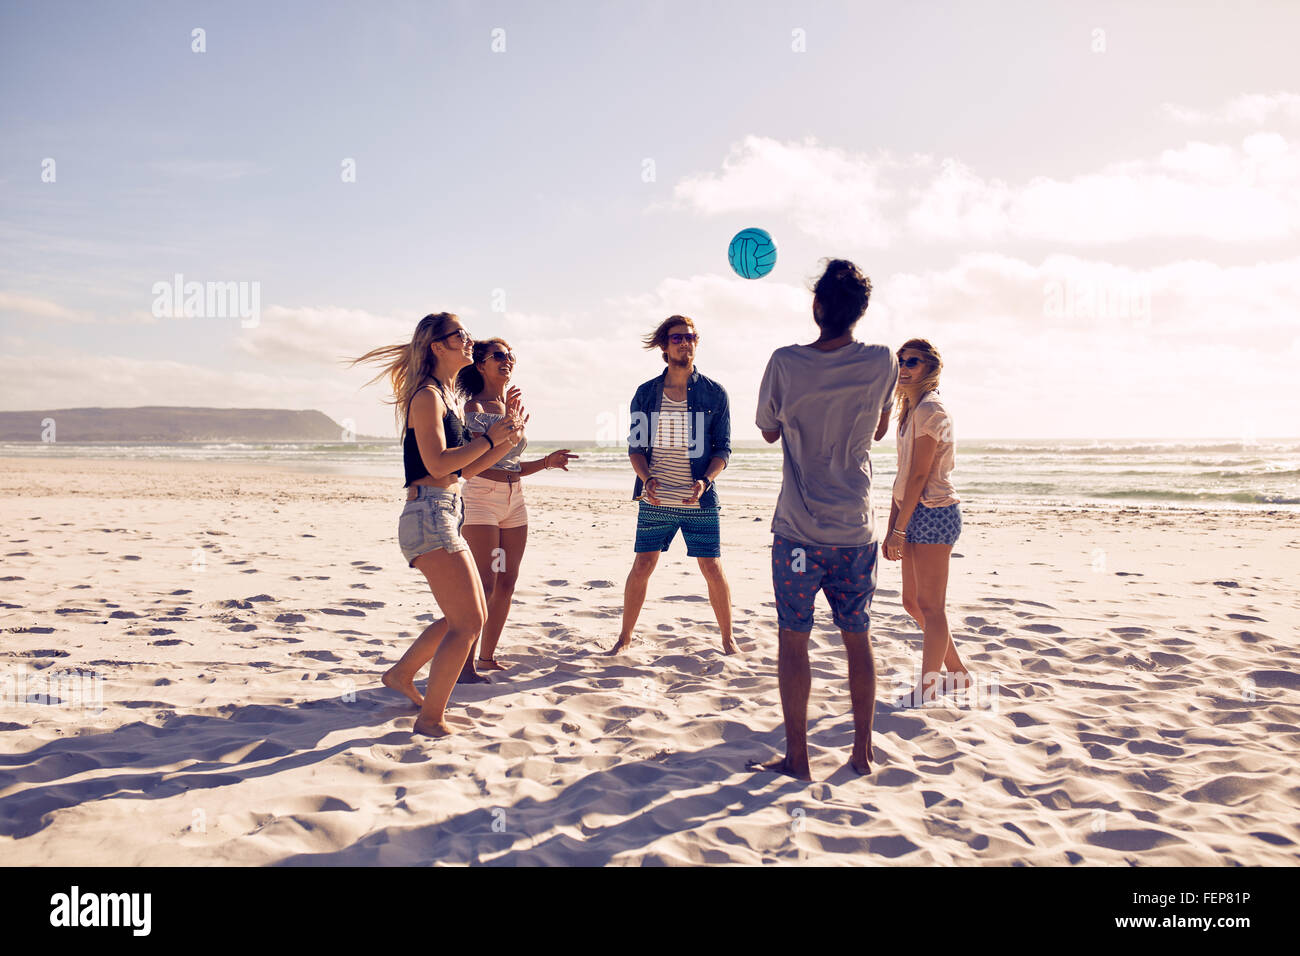 Group of young people playing with ball at the beach. Young friends enjoying summer holidays on a sandy beach. Stock Photo